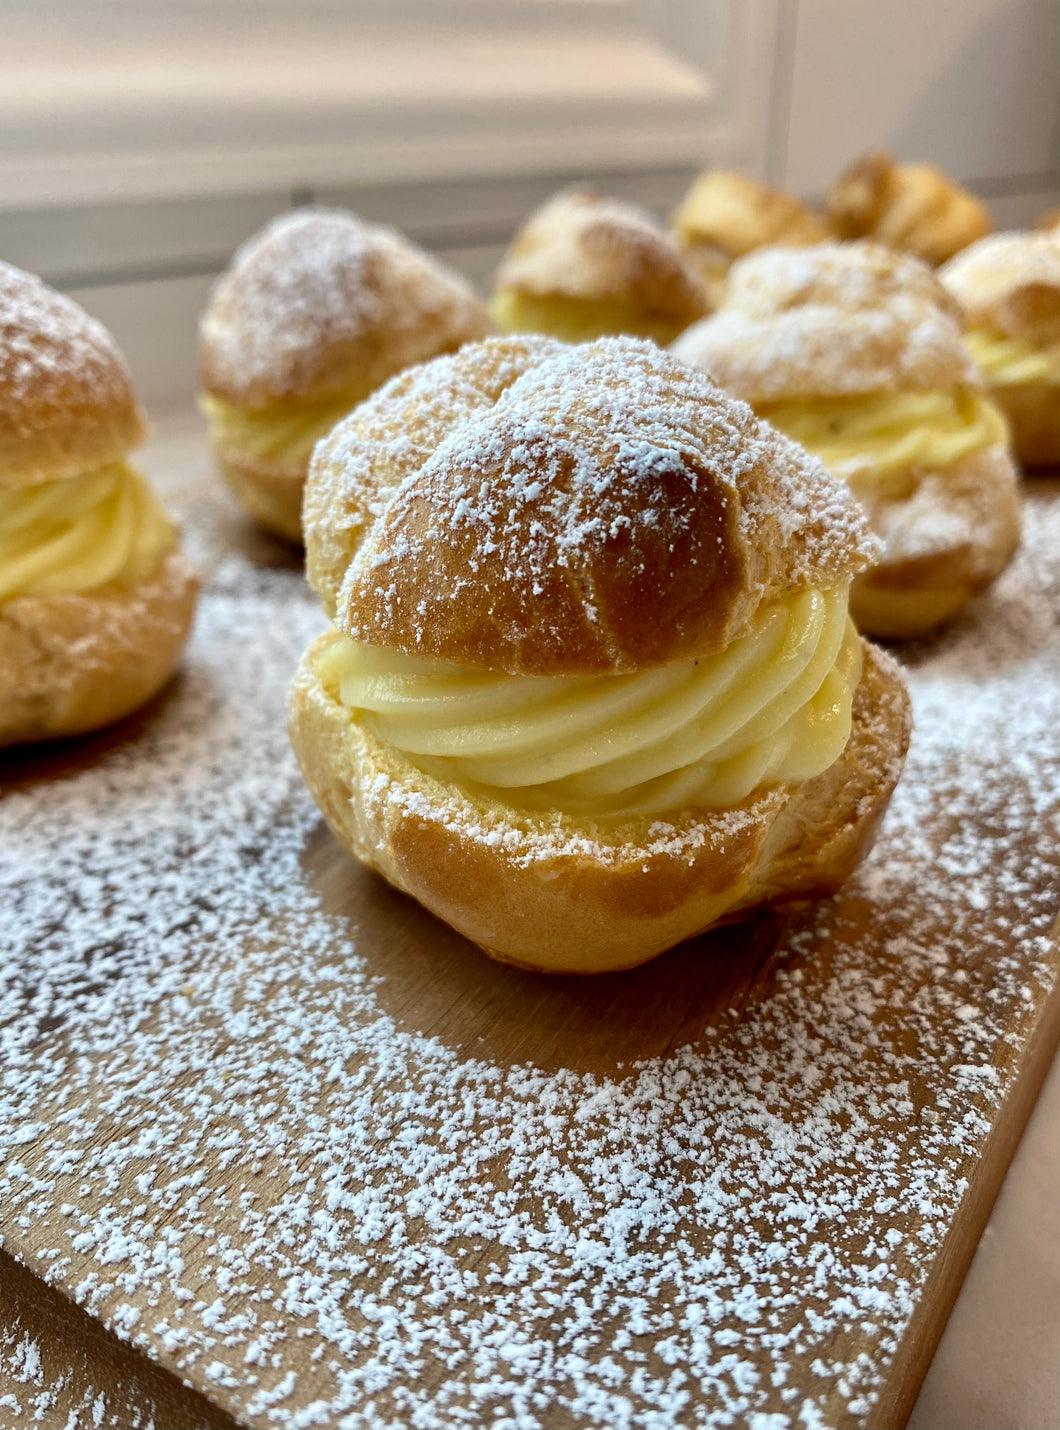 Pastry: Cream Puffs and Eclairs